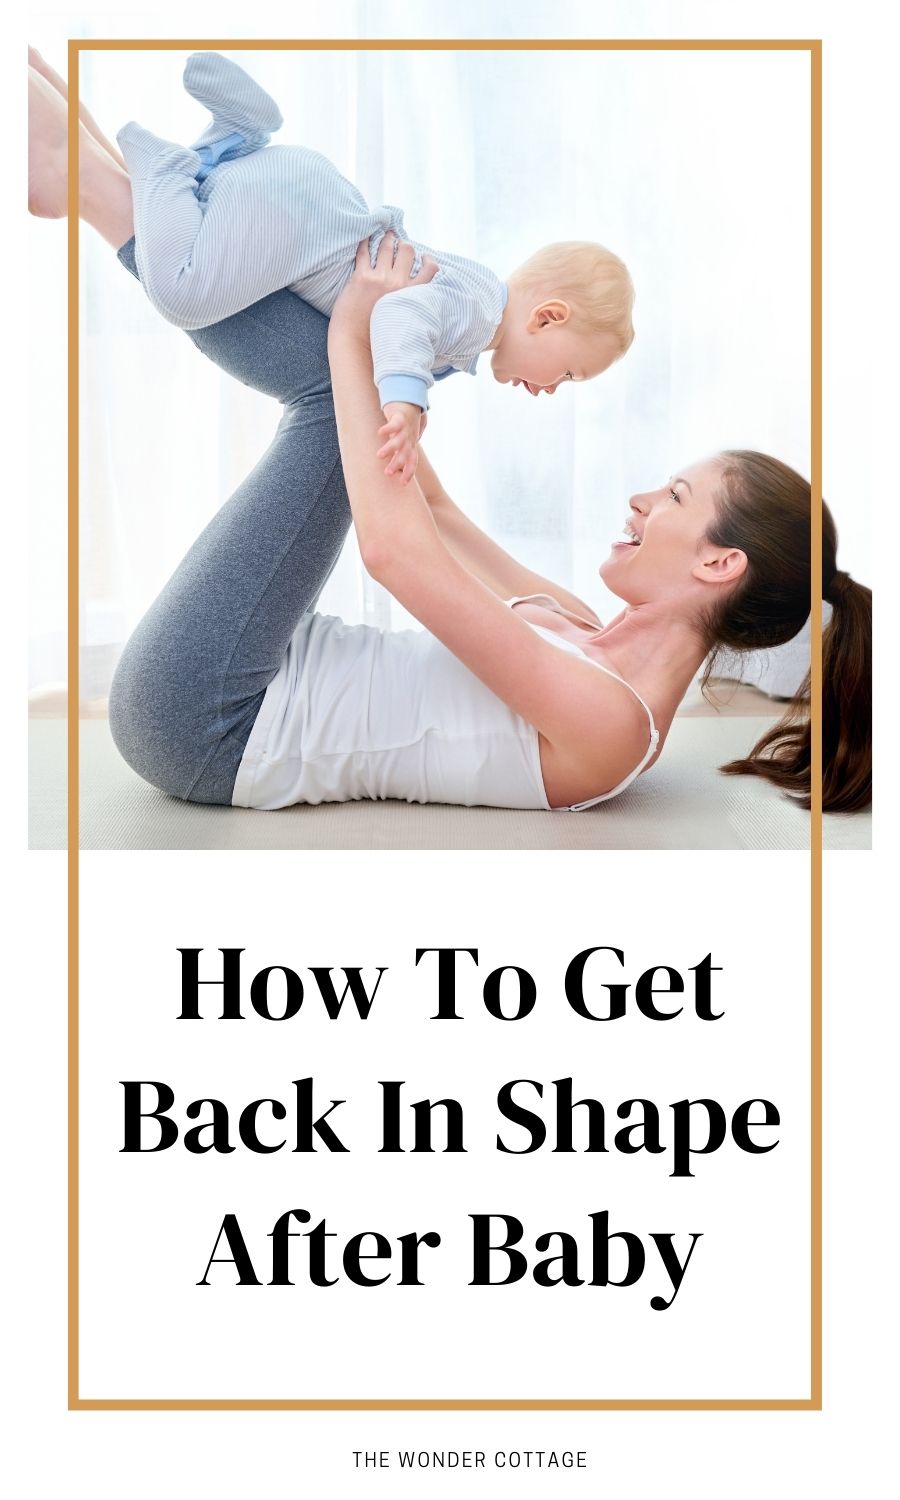 How to get back in shape after baby